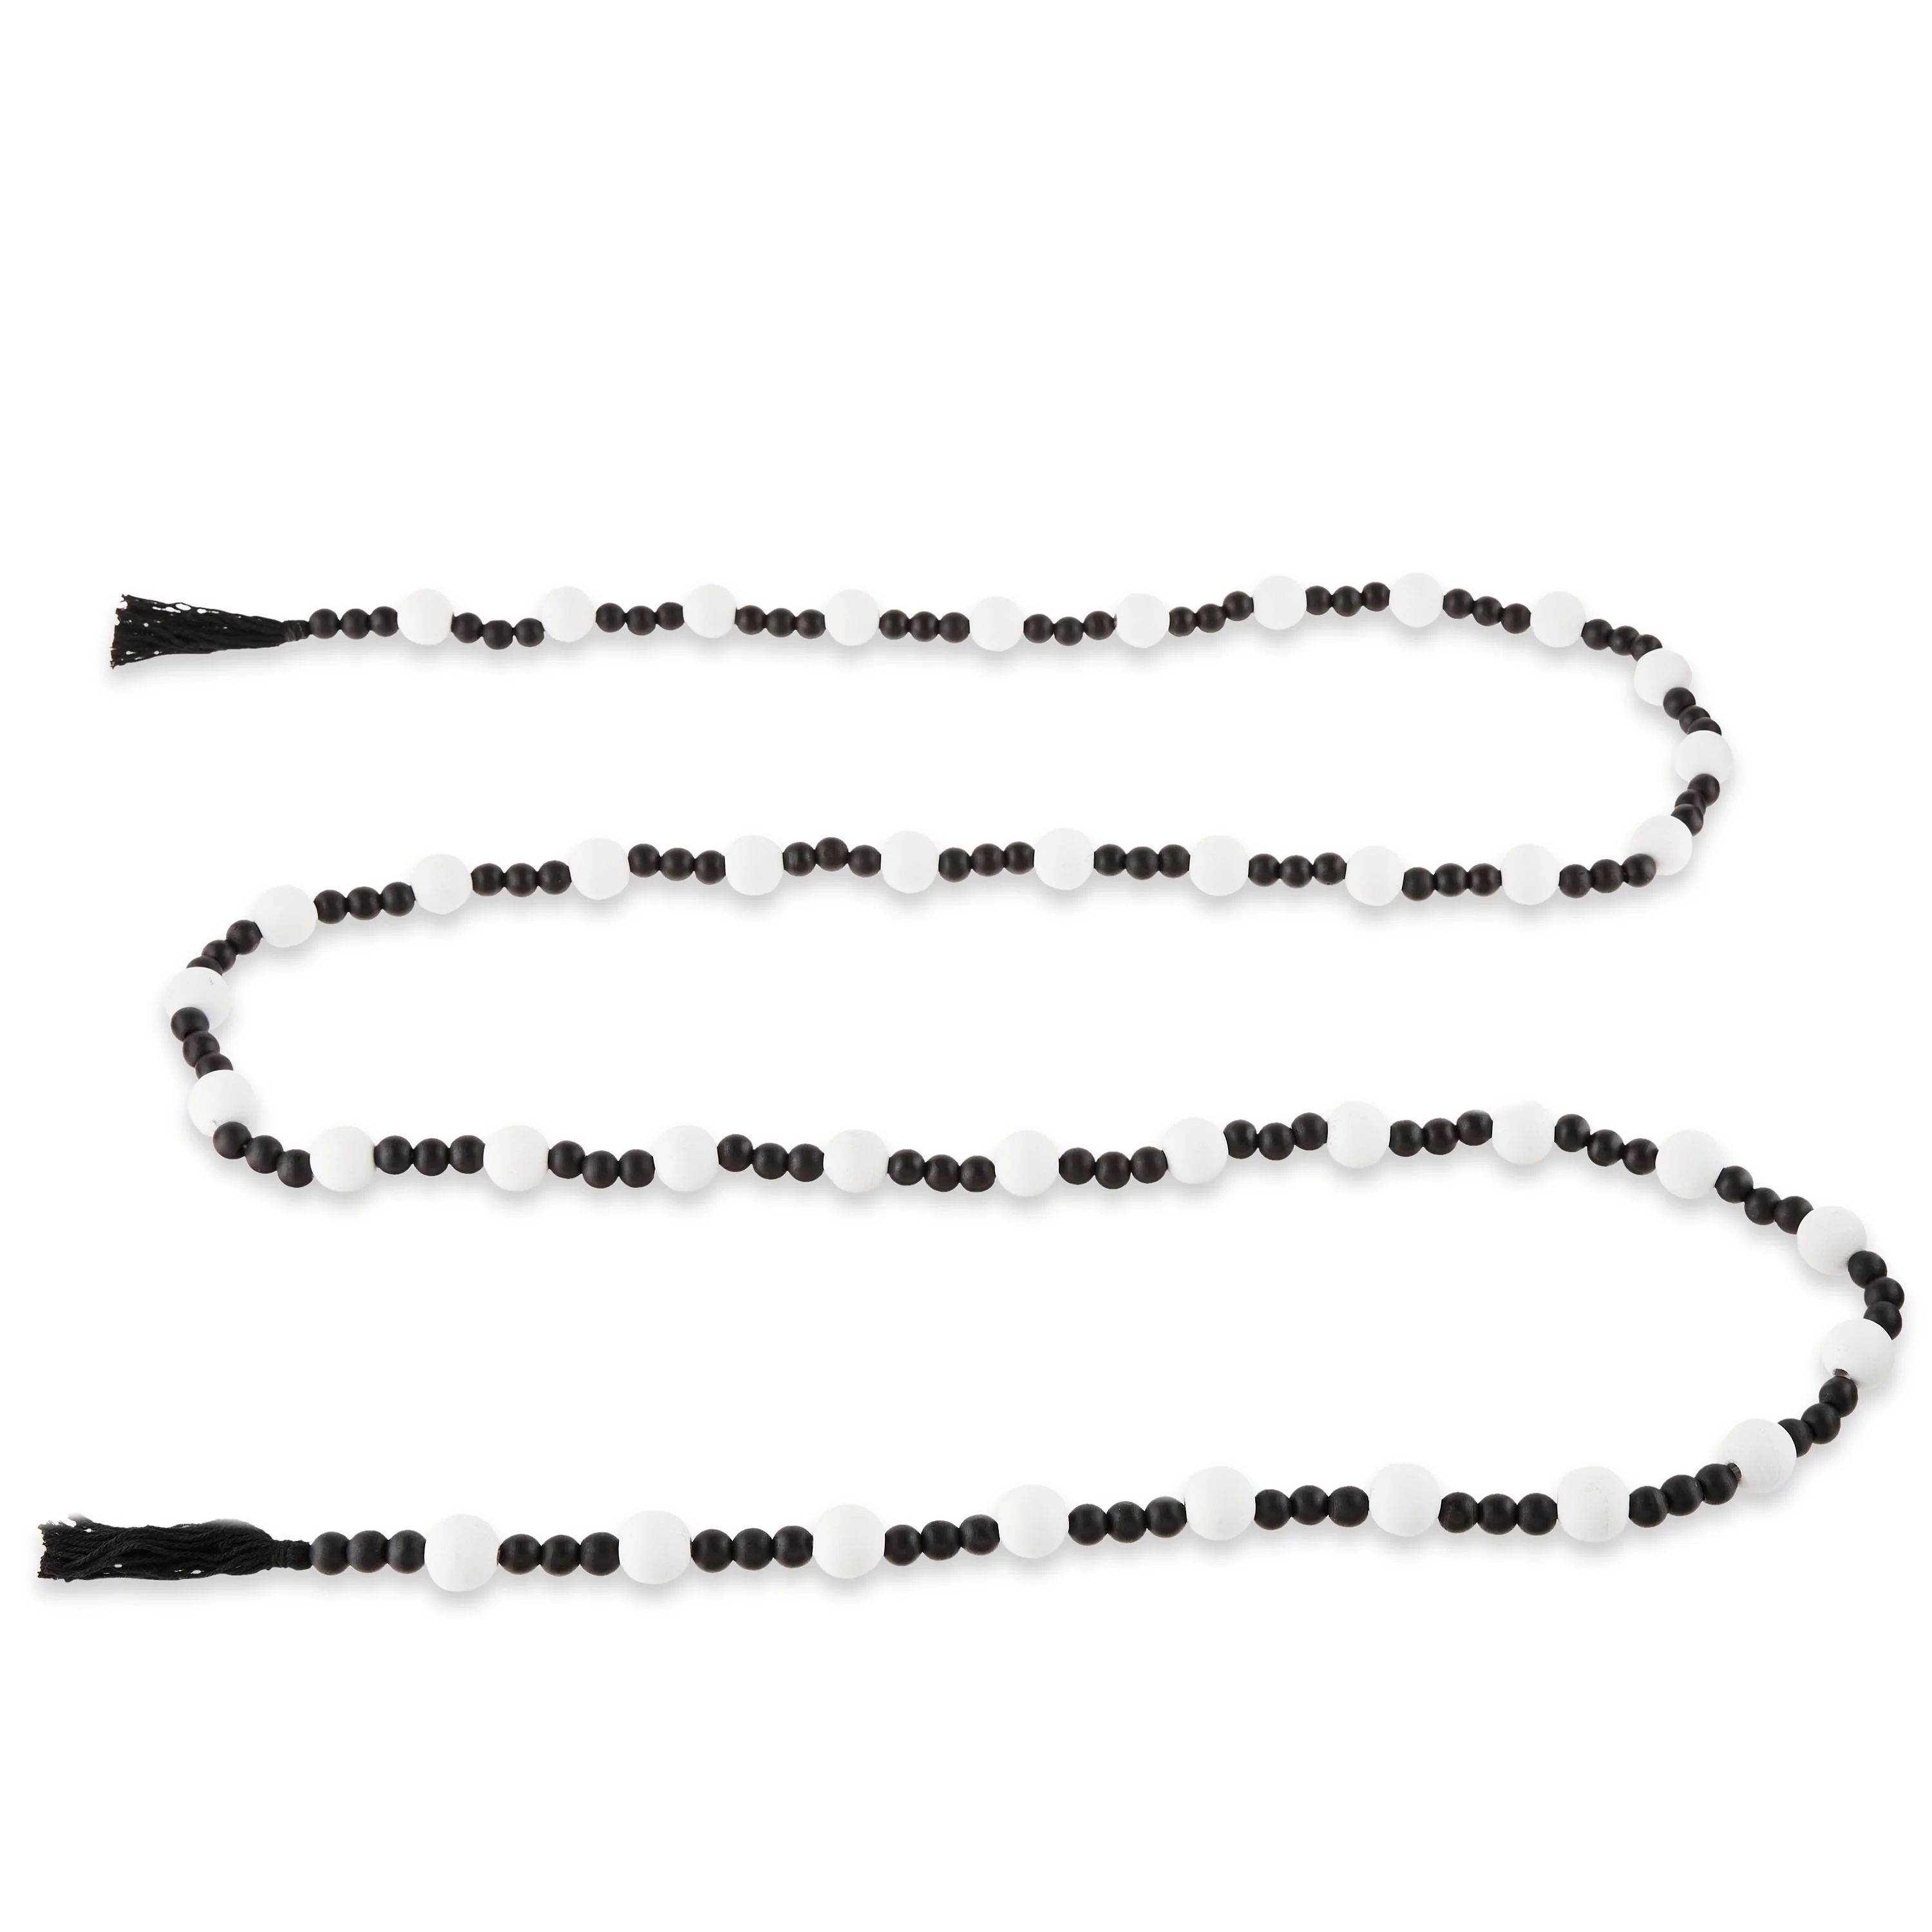 Black and White Natural Decorative 14mm and 25mm Wood Bead Garland, 9 ft, by Holiday Time | Walmart (US)